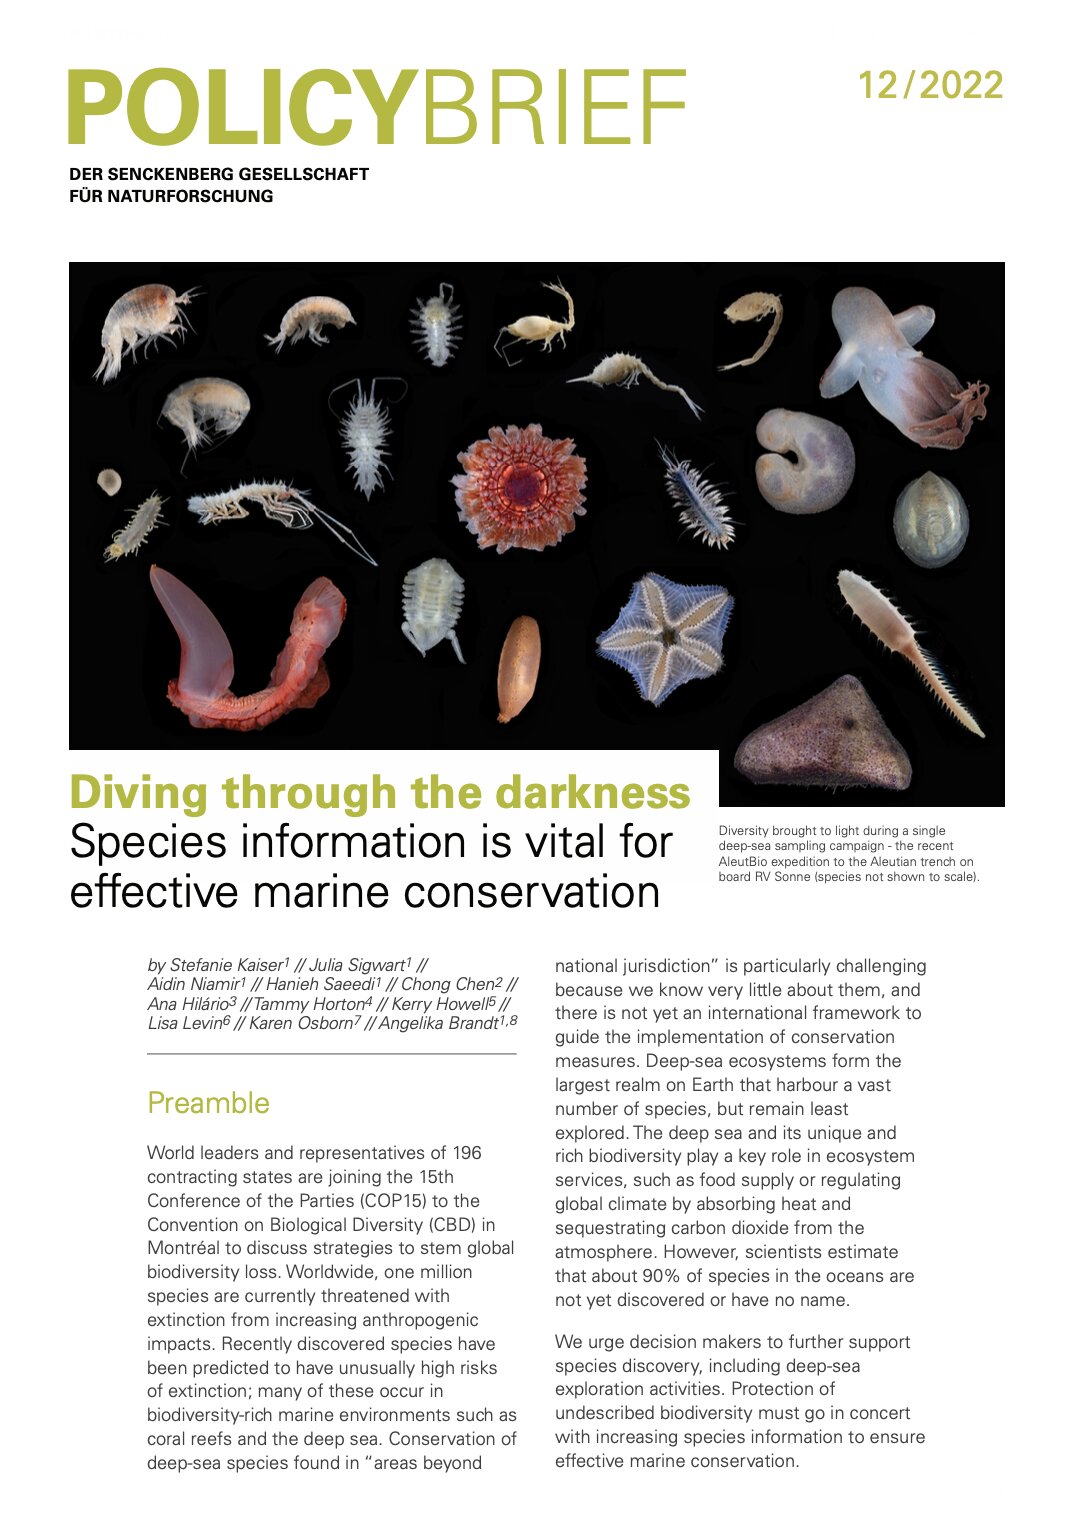 #Experts urge COP15 policy makers to support research to find, catalogue, protect disappearing deep-sea species